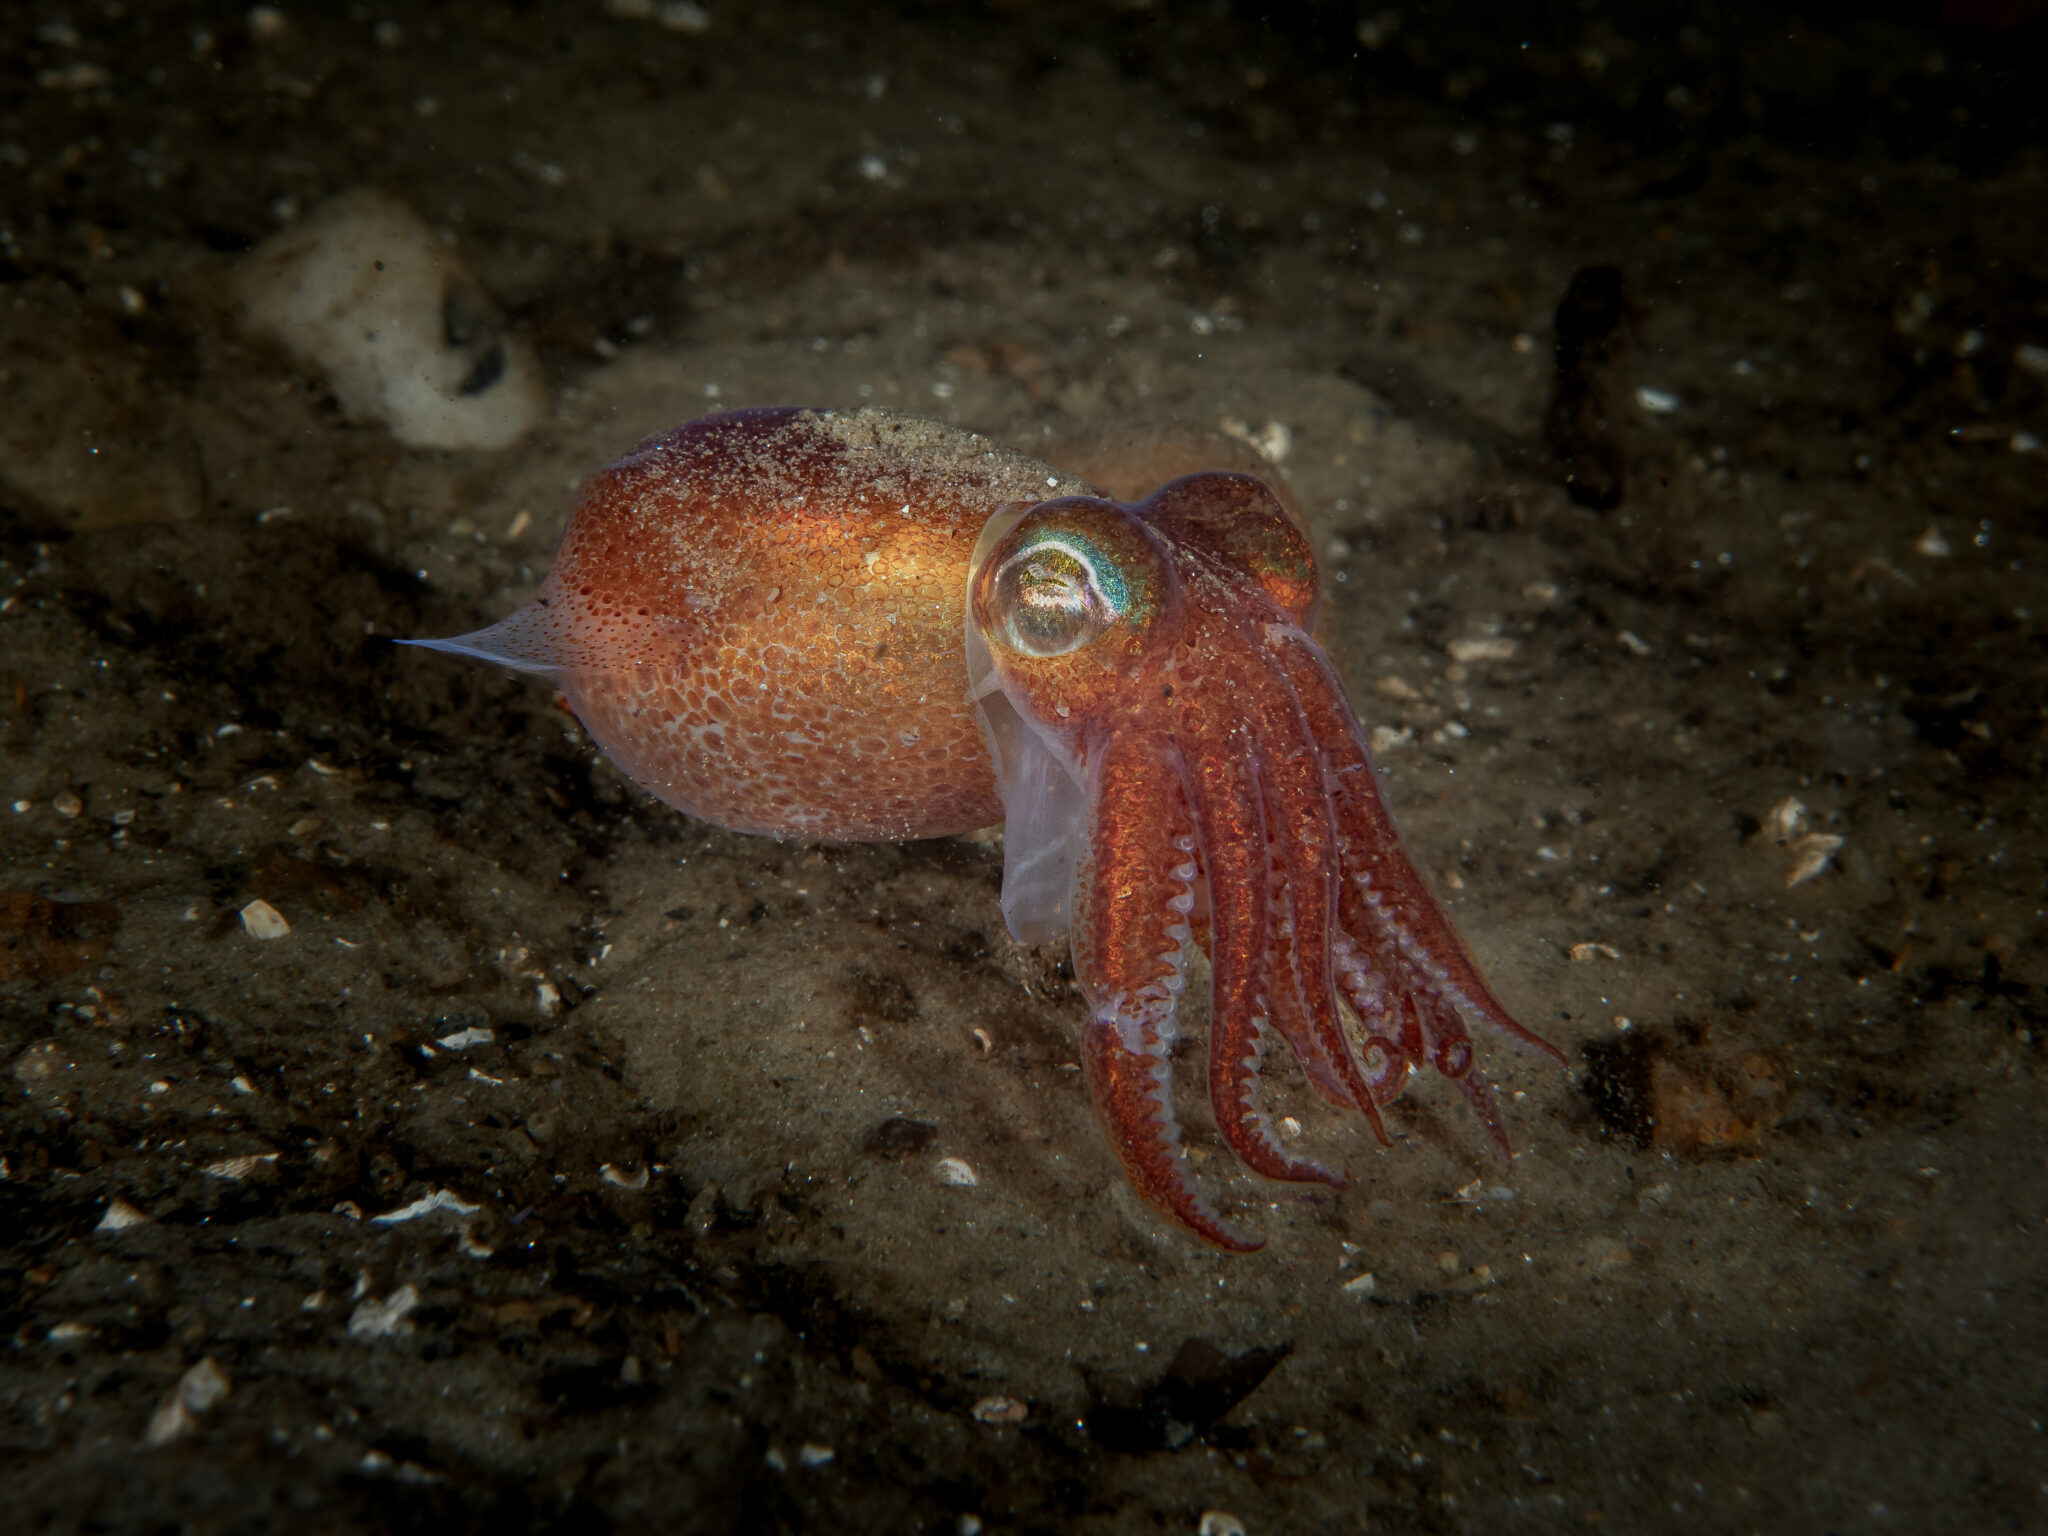 Bobtail squid on the seabed during a night dive.